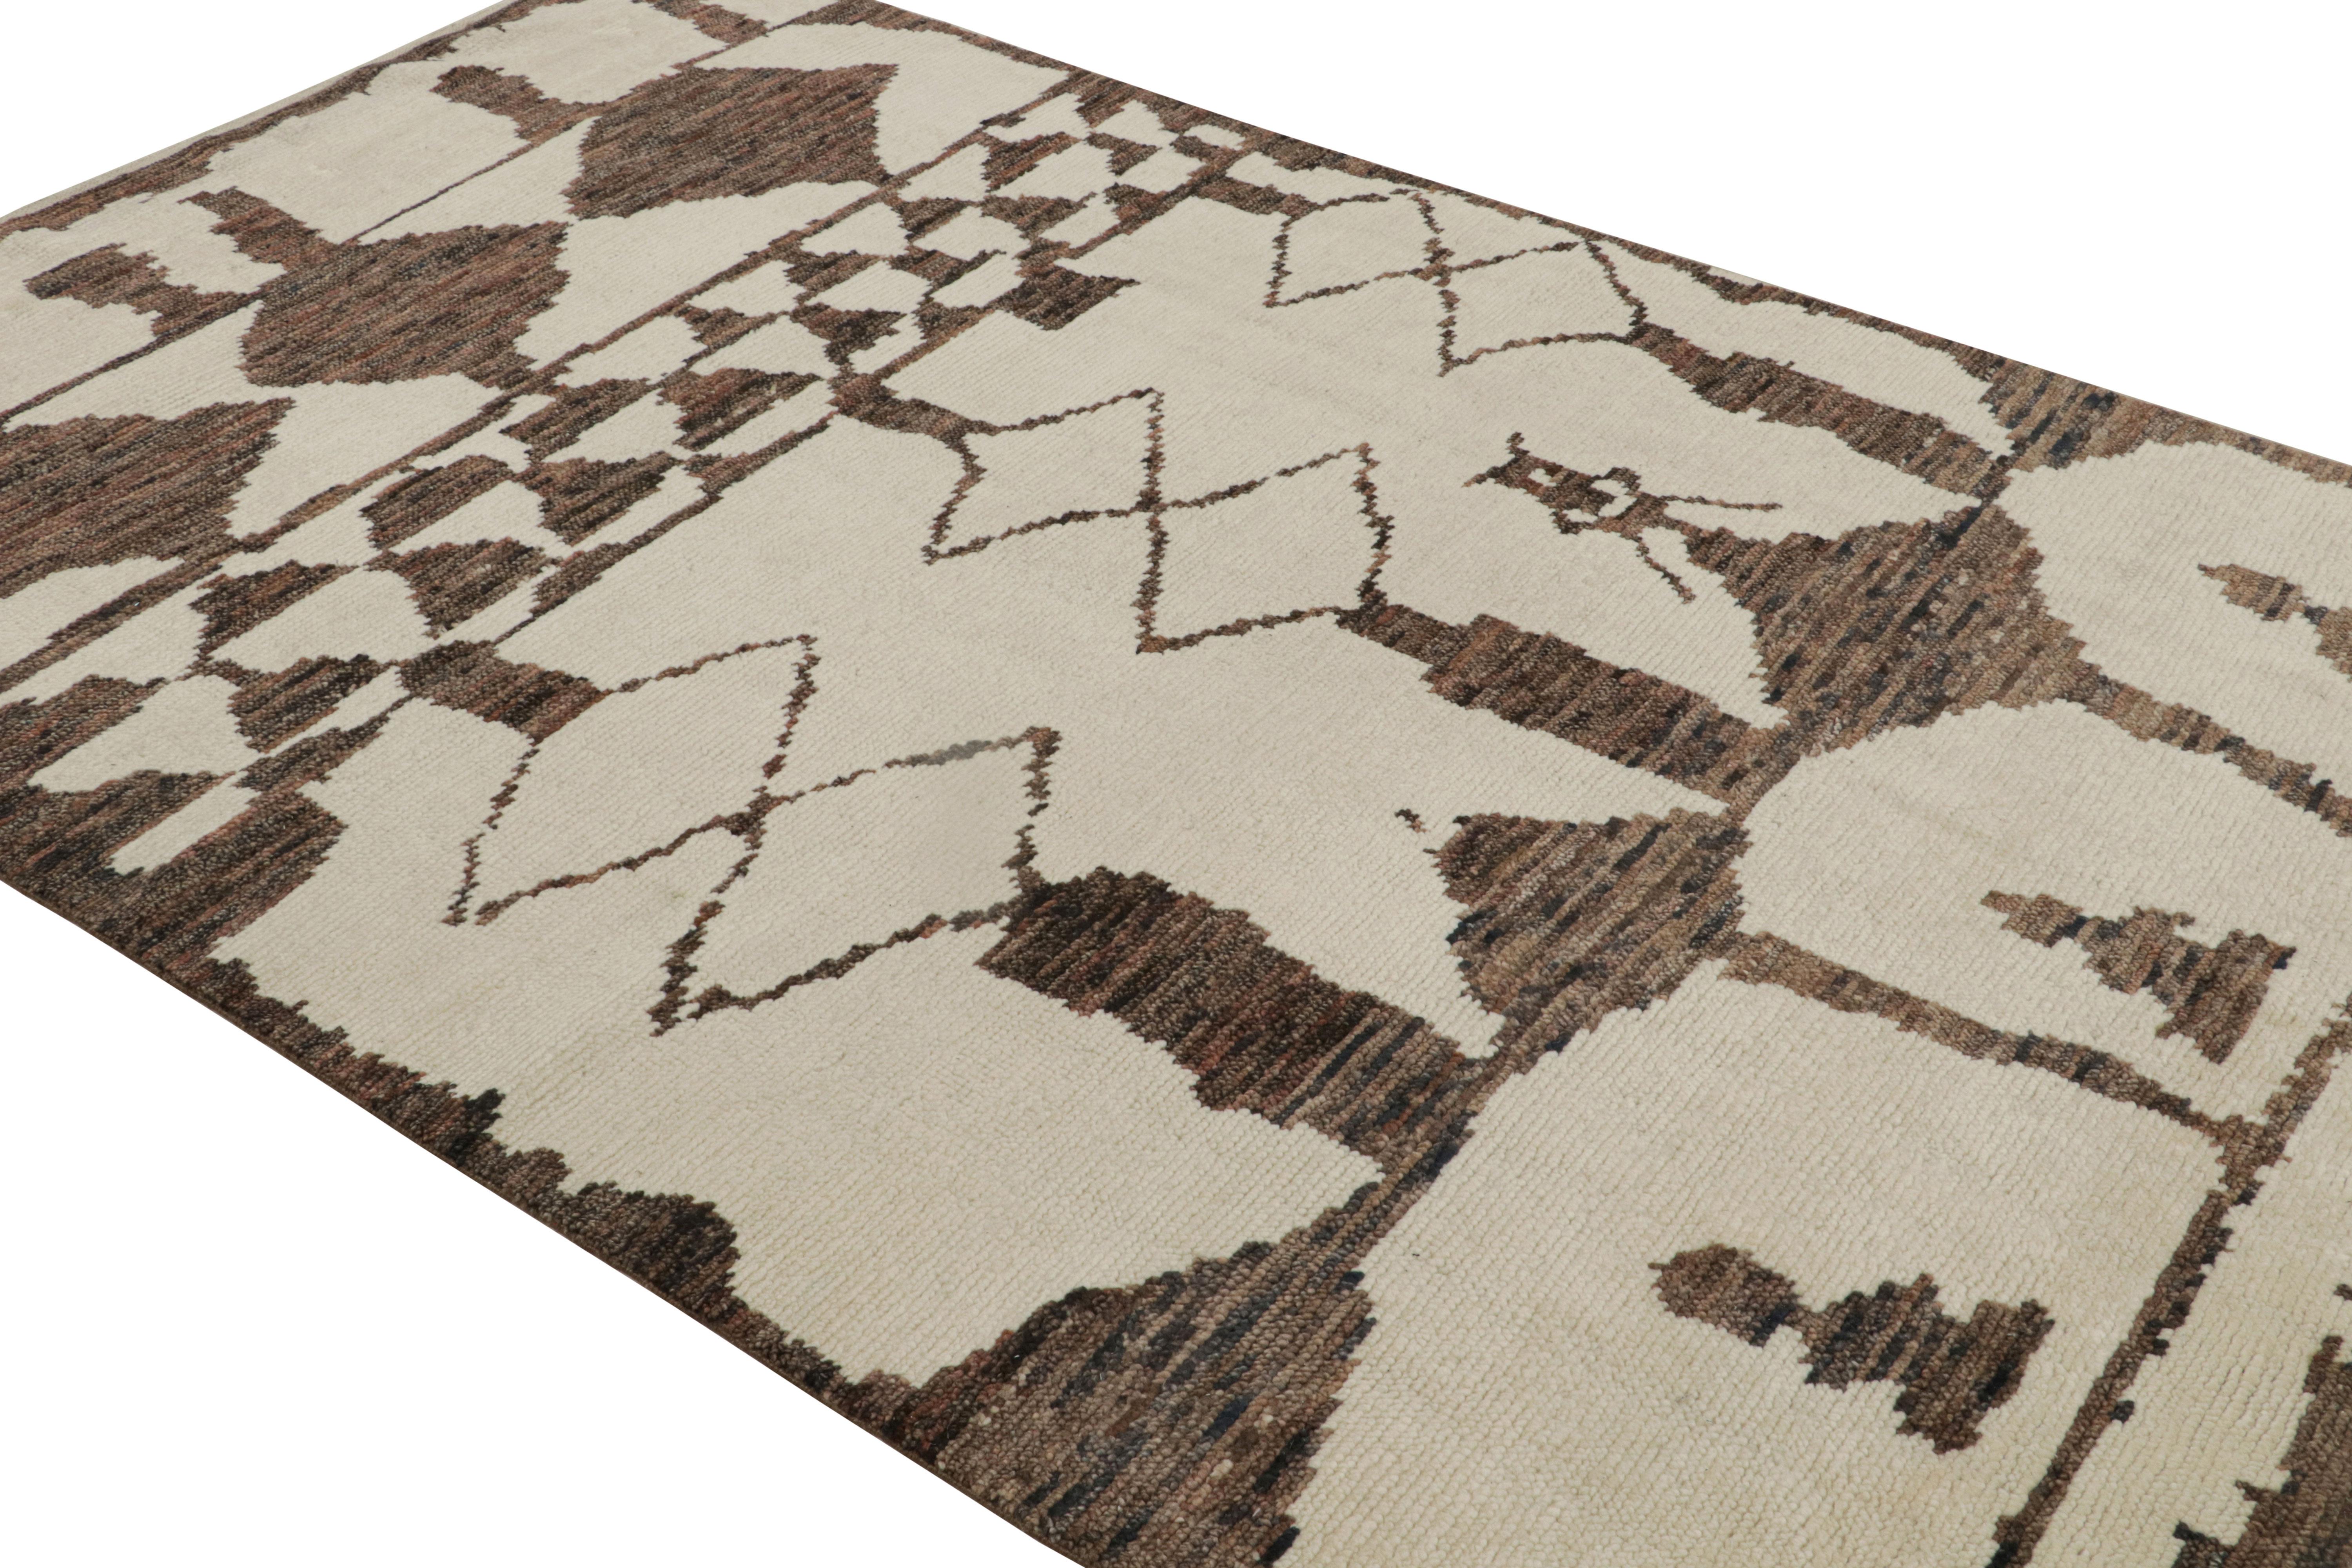 Hand-knotted in wool, this 6x10 contemporary Moroccan style rug in beige and brown, exemplifies Rug & Kilim’s take on contemporary aesthetics. 

On the Design: 

Connoisseurs may admire the subtle appeal of the rug that comes from a Berber geometric